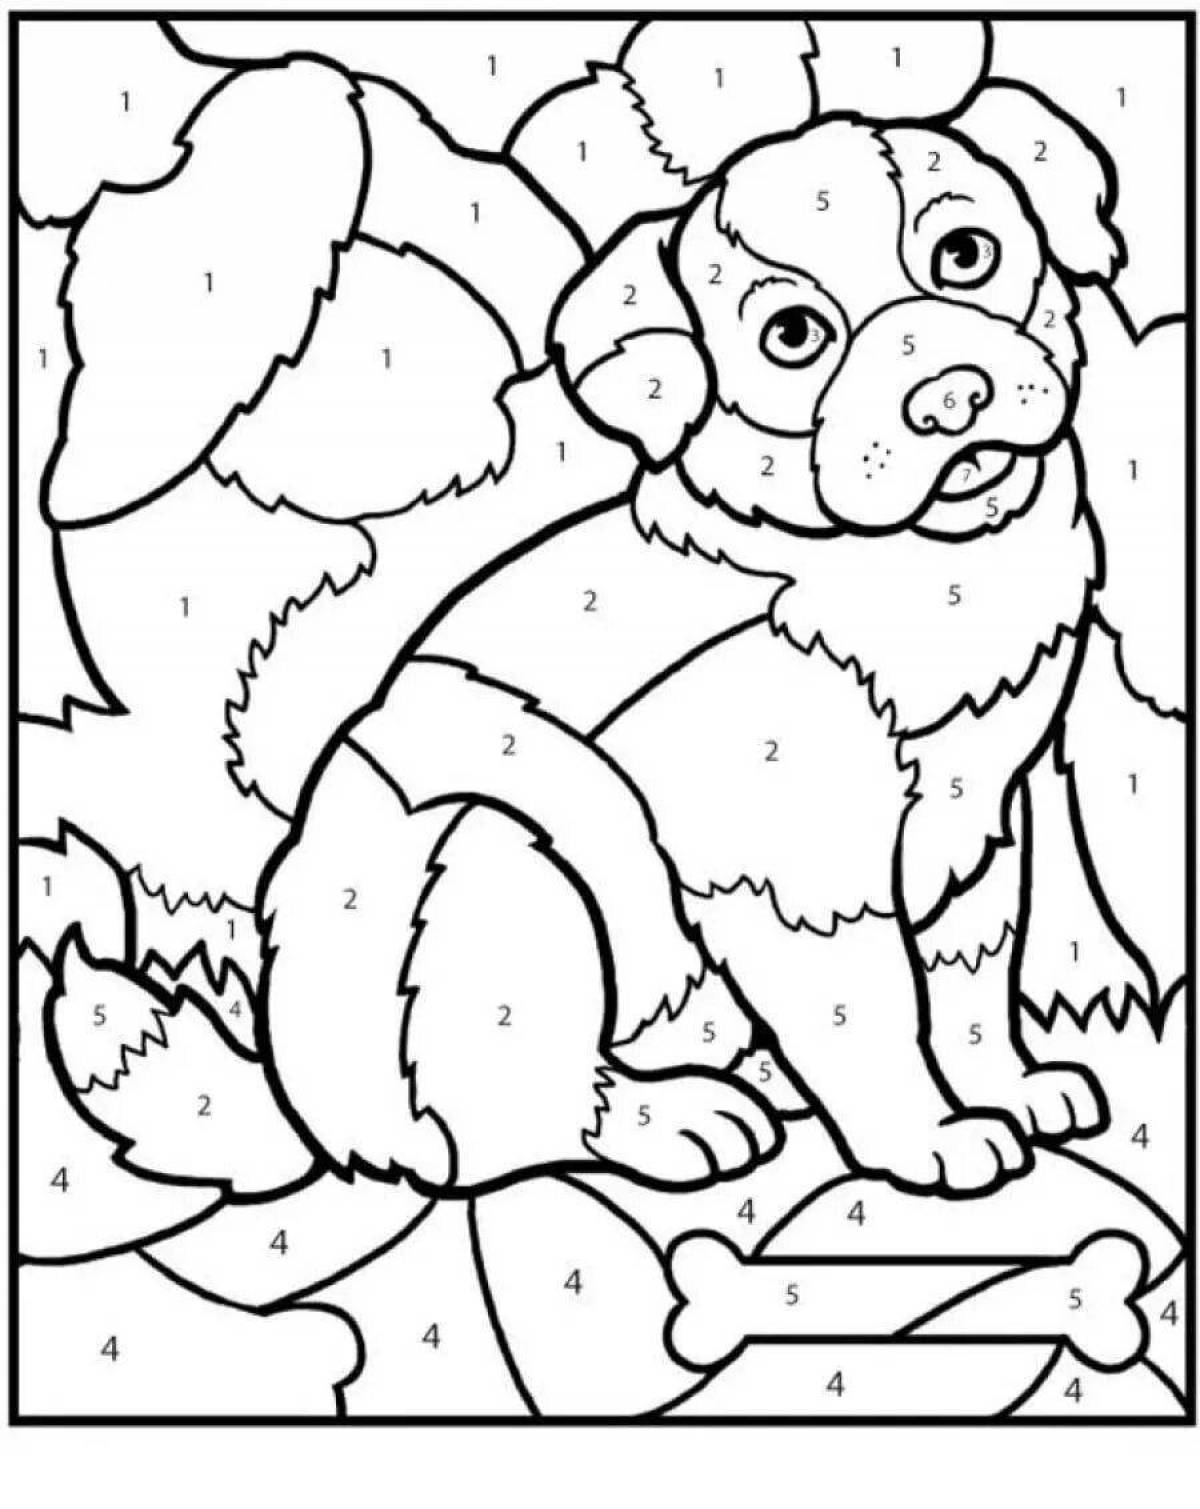 How to color by number #4